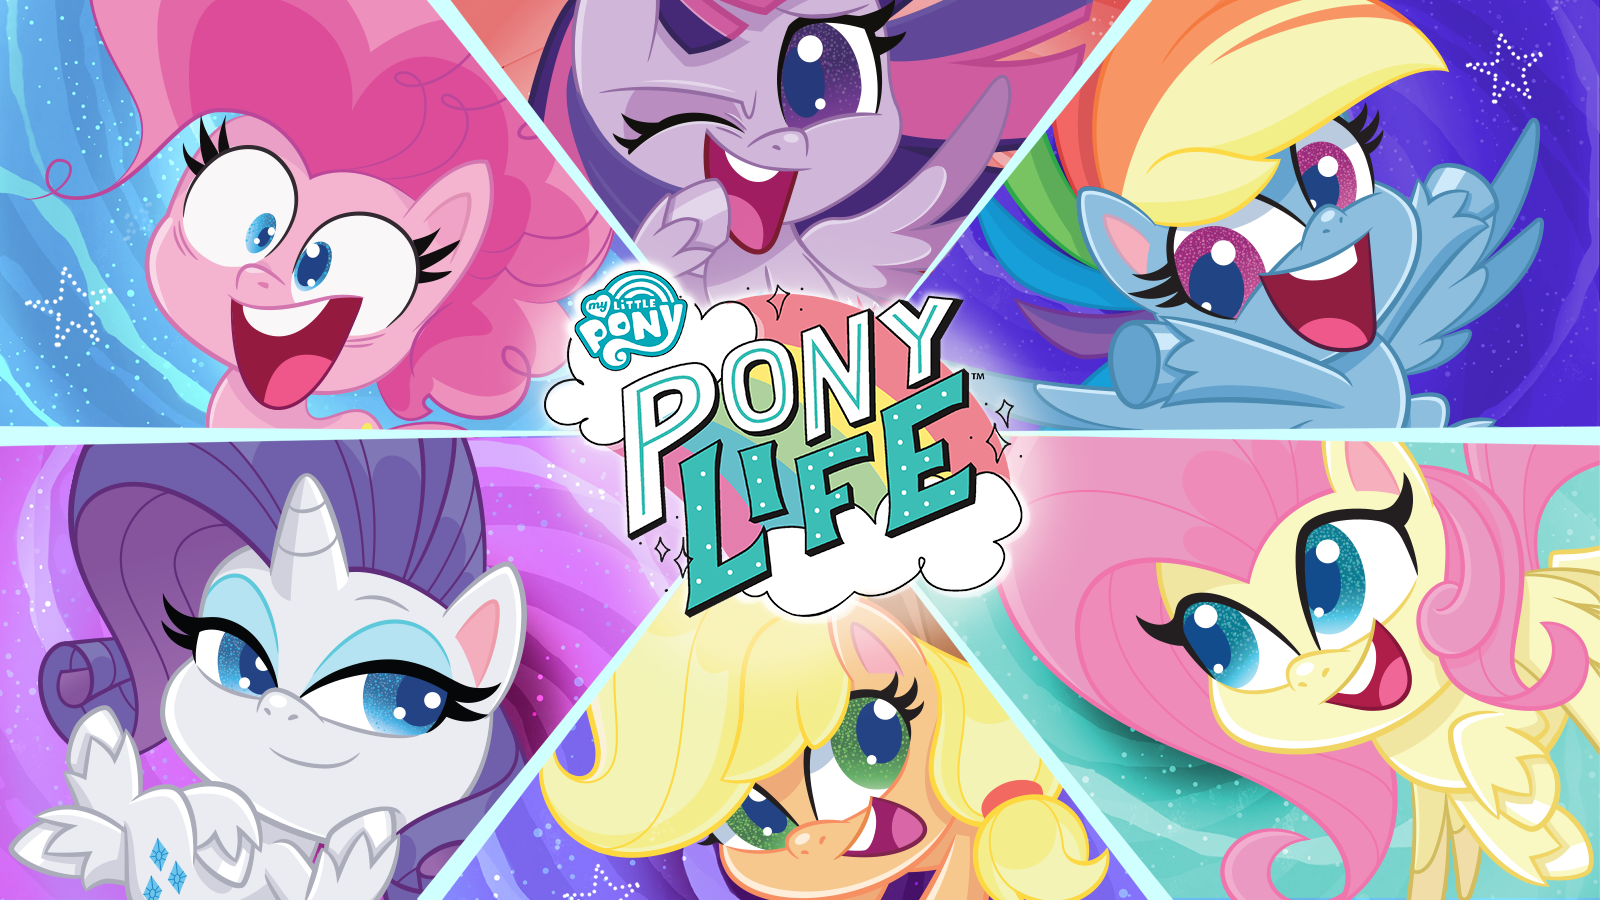 dan worcester recommends Baby My Little Pony Videos